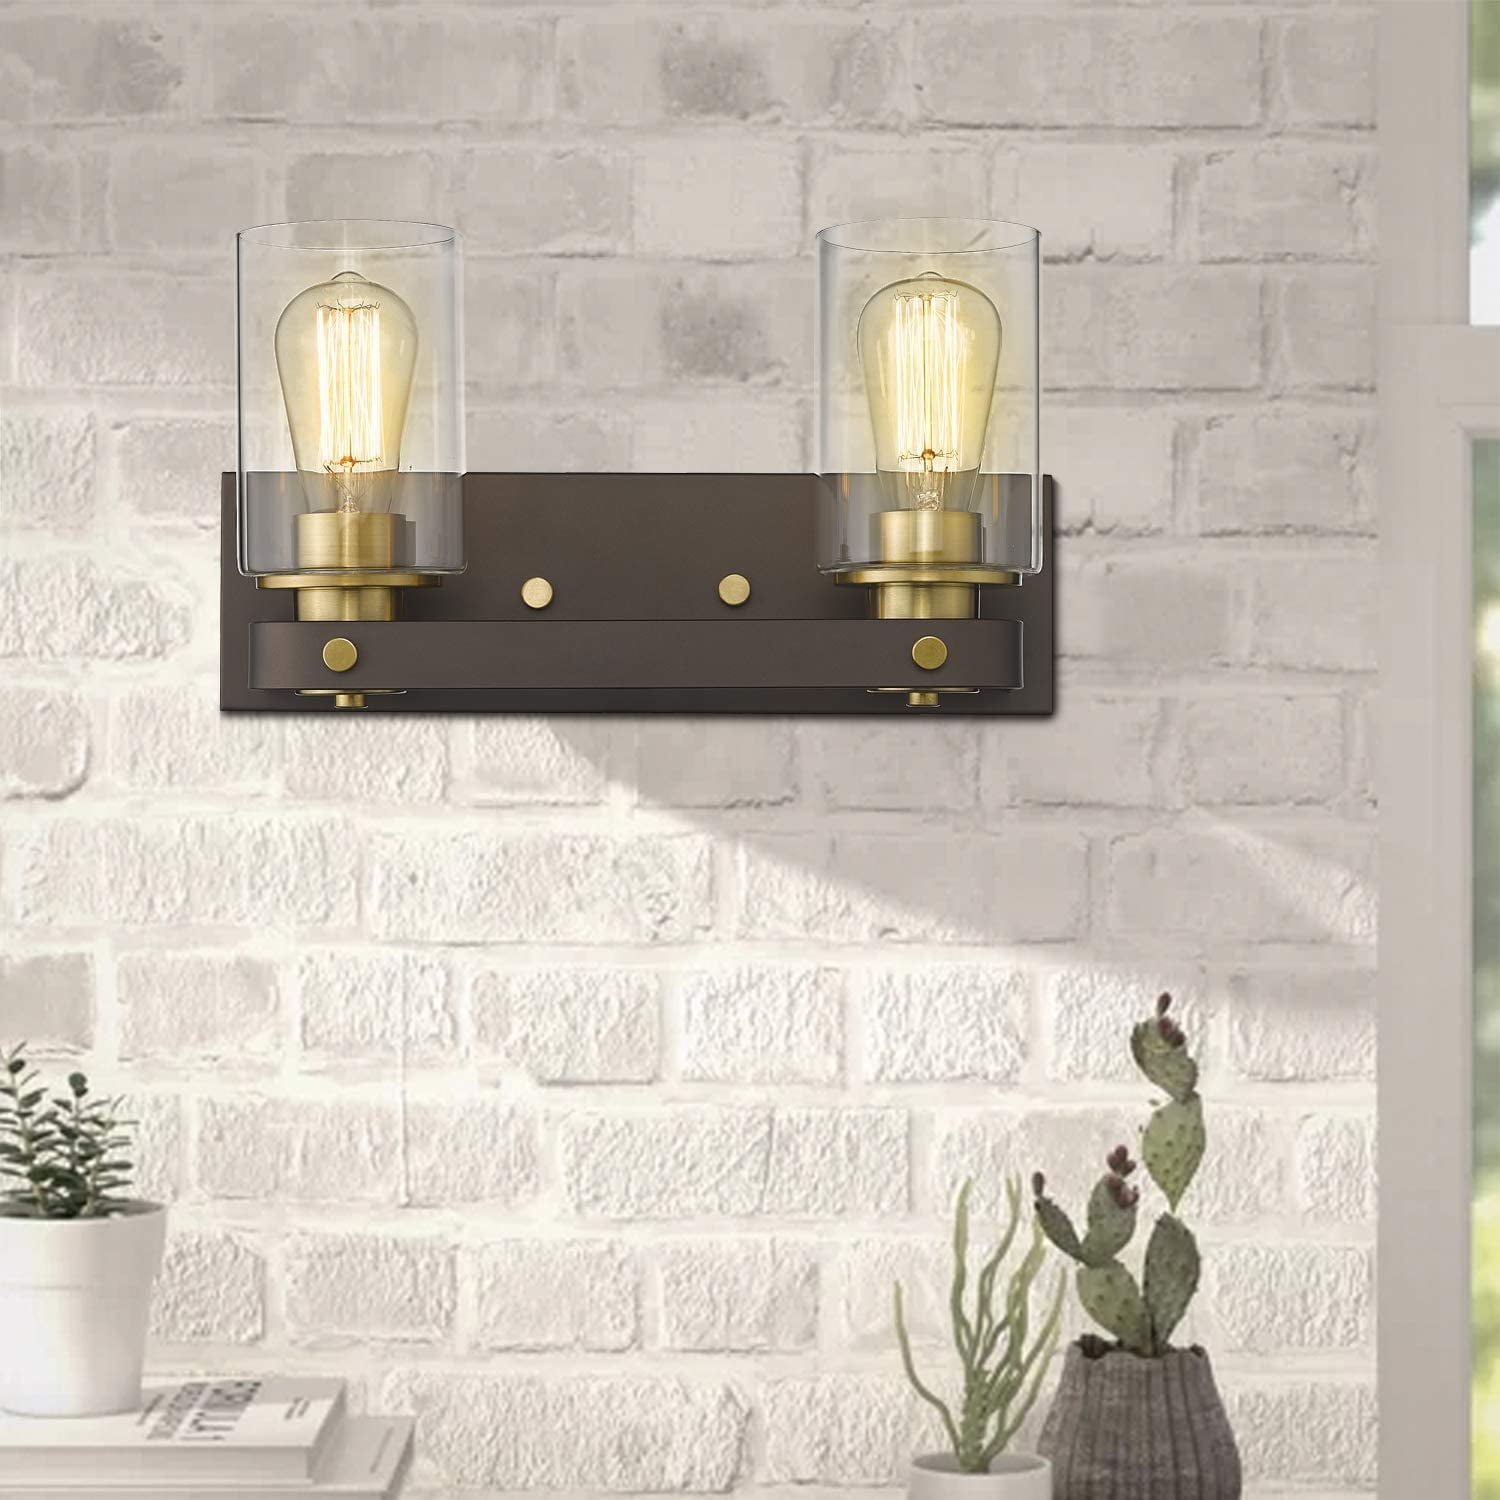 2-Light Bathroom Vanity Light Oil Rubbed Bronze and Gold Finish w/ Clear Glass